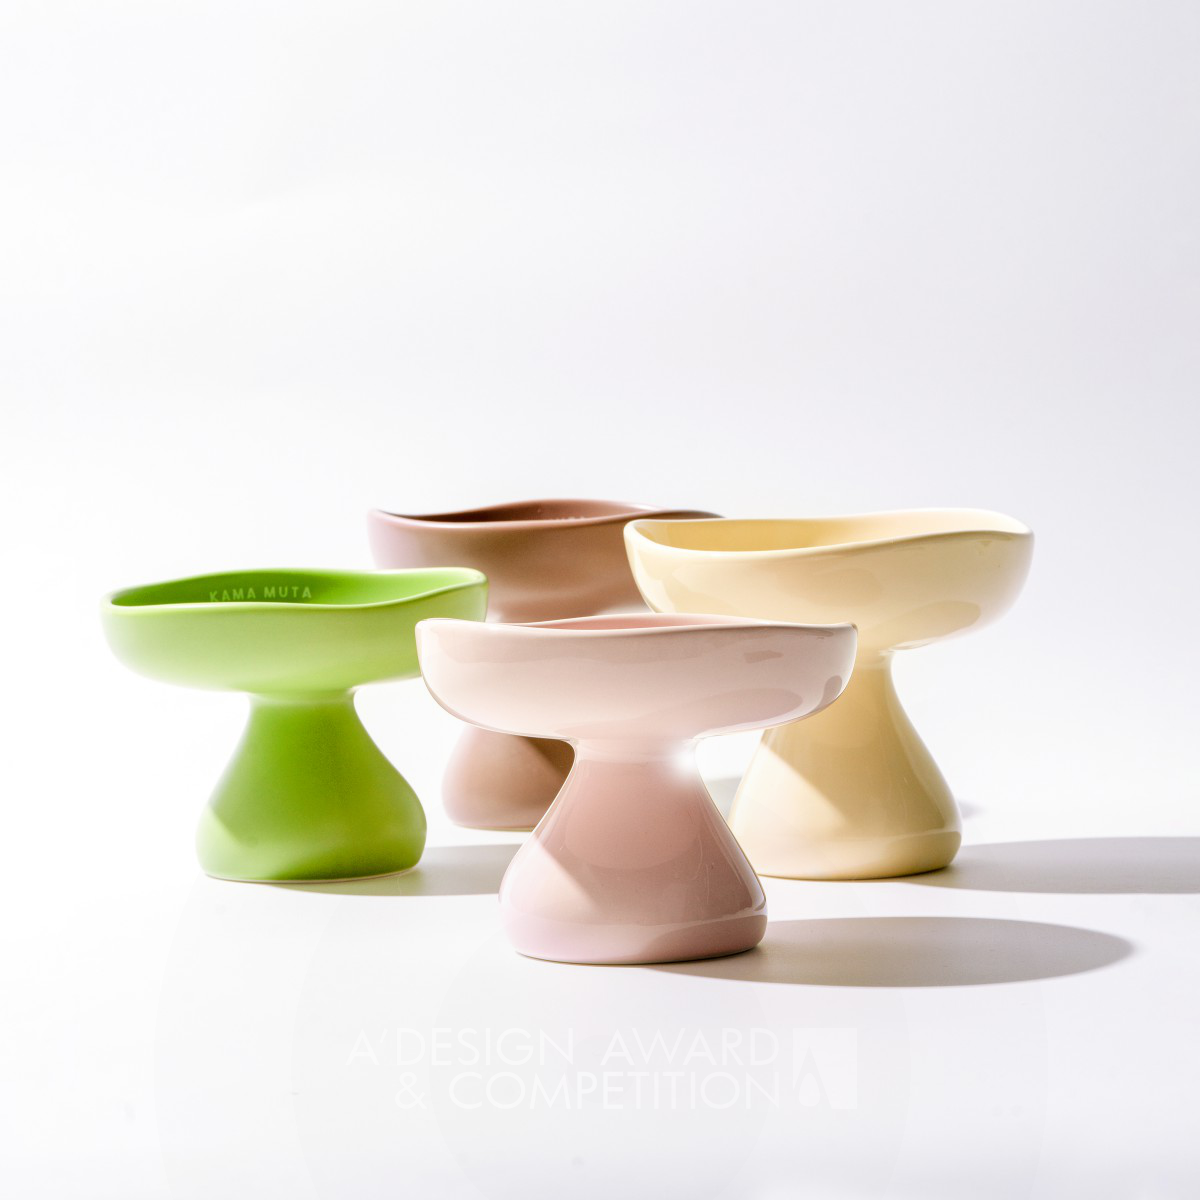 Mushroom Pet Bowl by Kama Muta Bronze Pet Care, Toys, Supplies and Products for Animals Design Award Winner 2024 